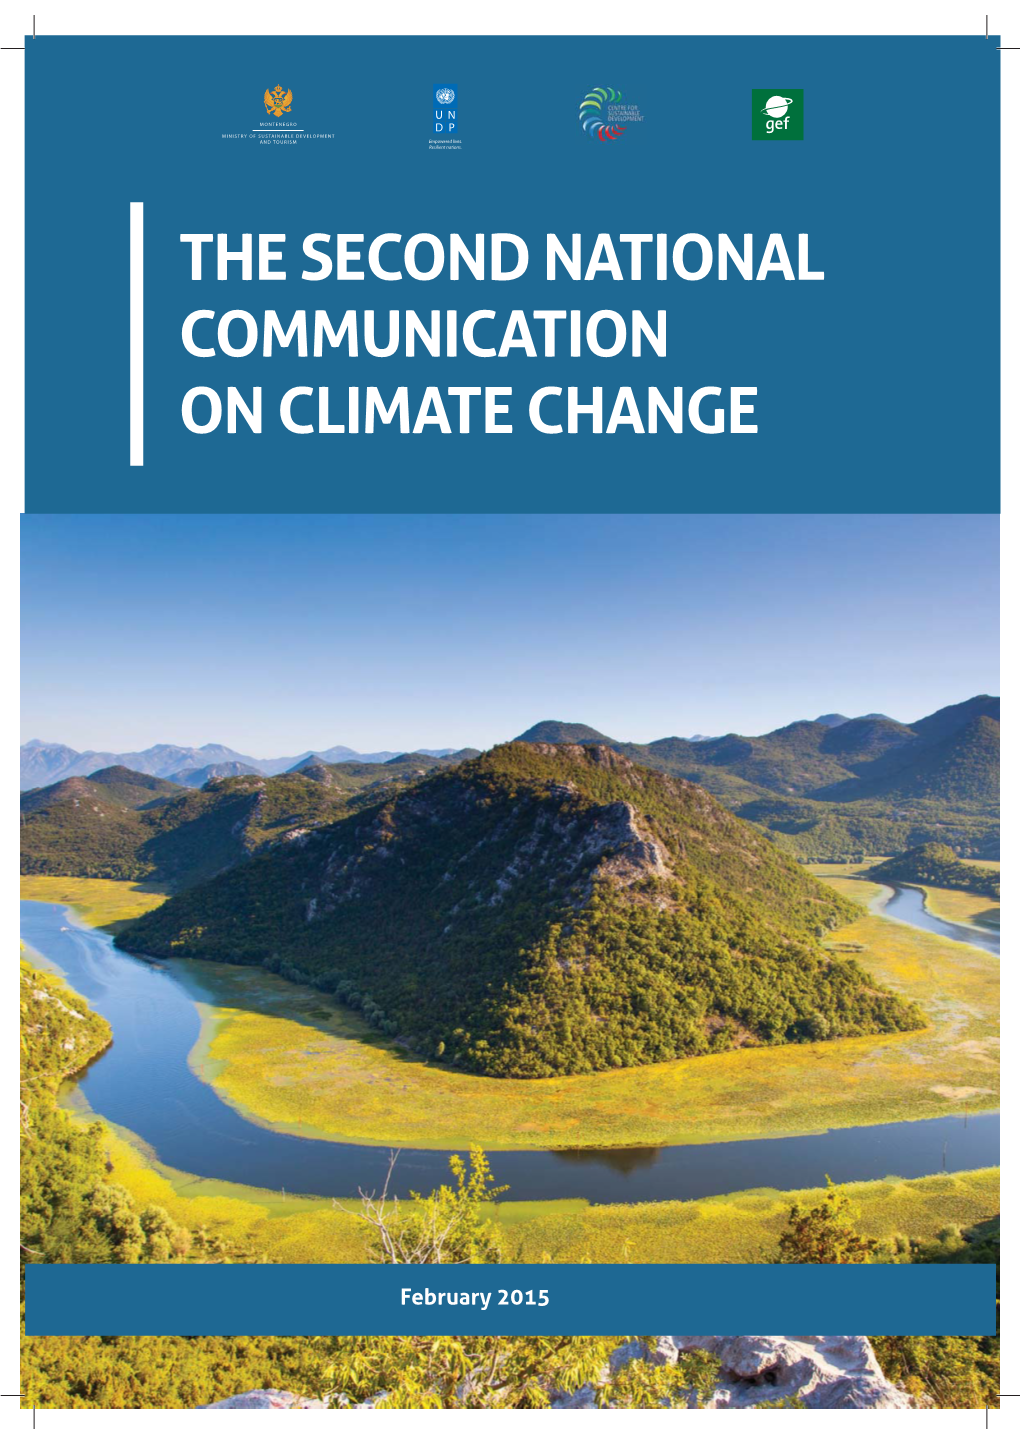 The Second National Communication on Climate Change